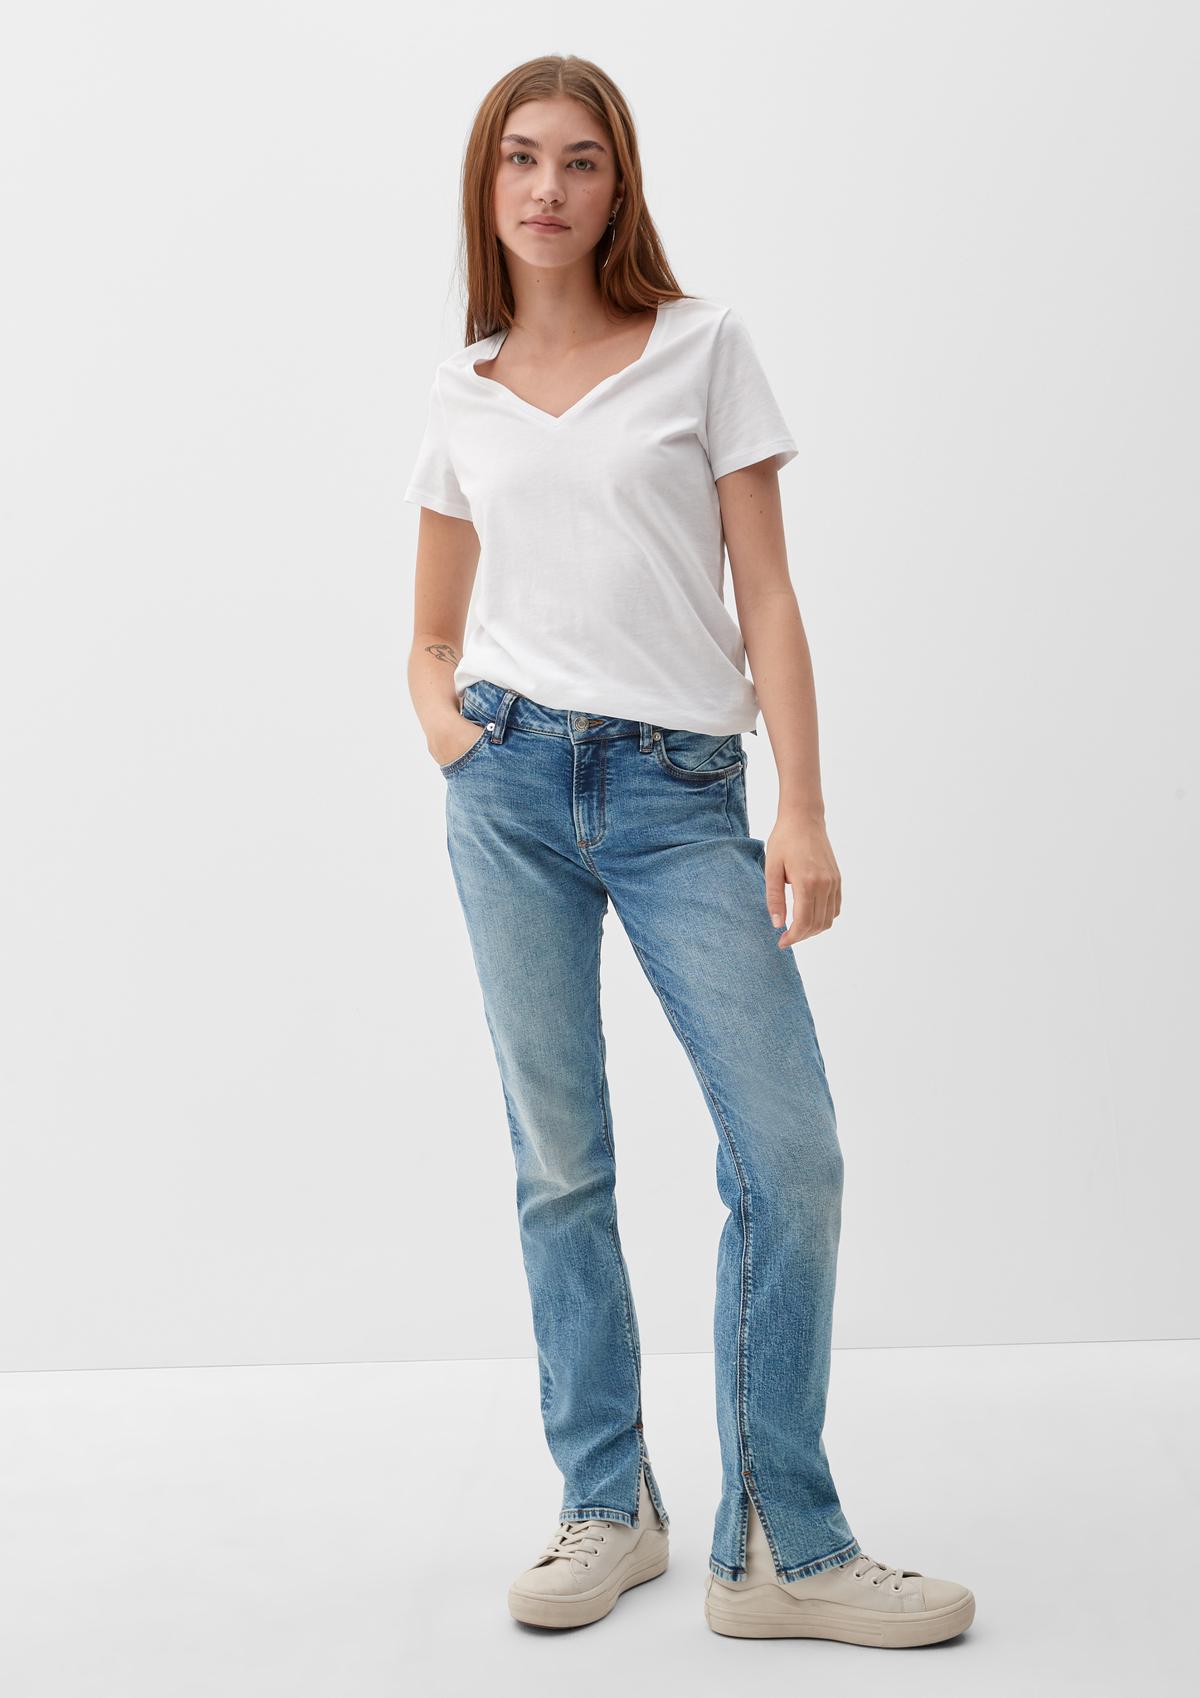 s.Oliver Jeans Catie / slim fit / mid rise / straight leg